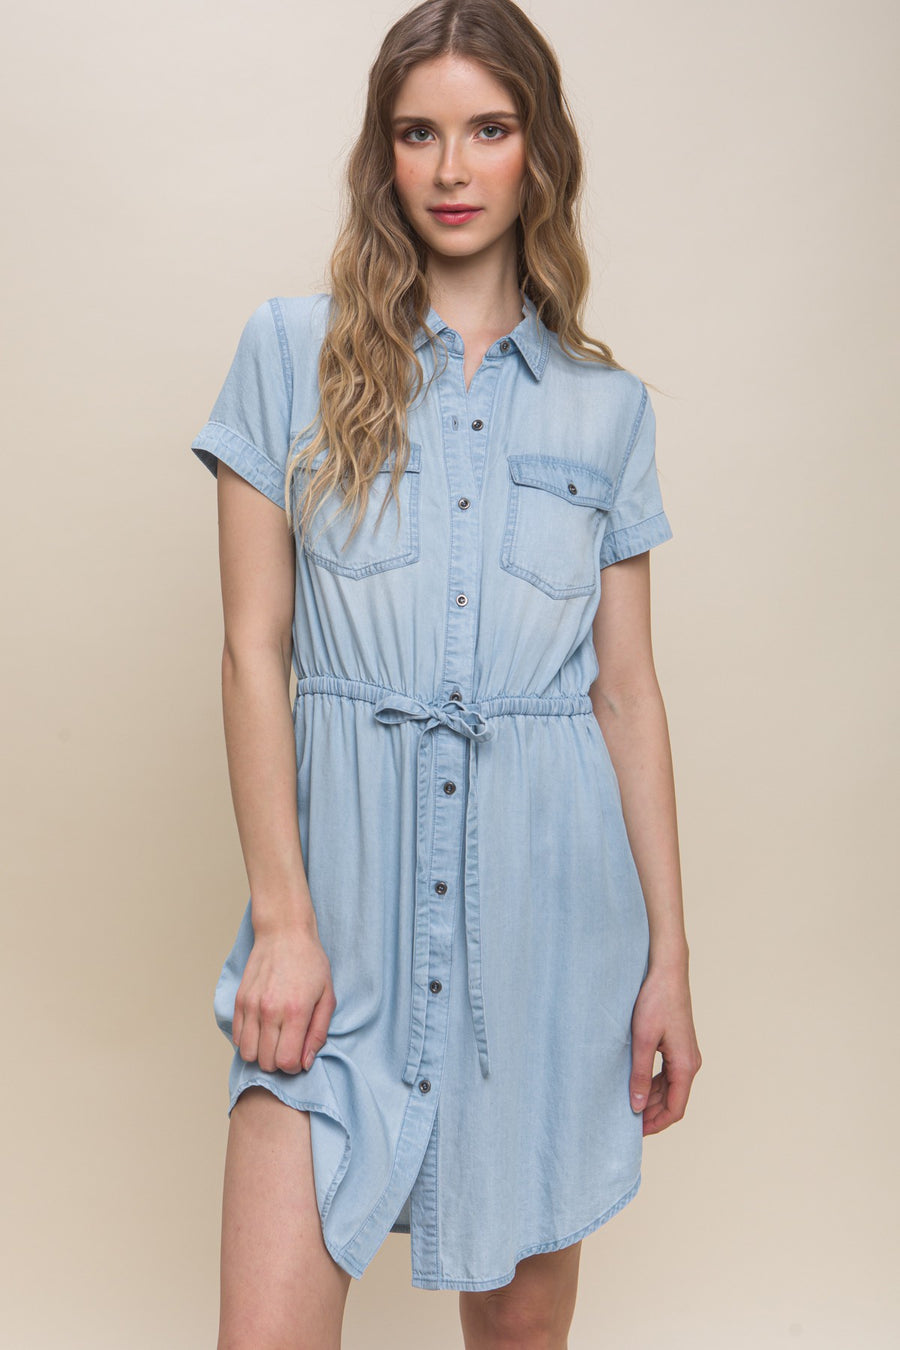 Featuring a short sleeve front tie collard mini dress with two chest pockets in the color light blue 